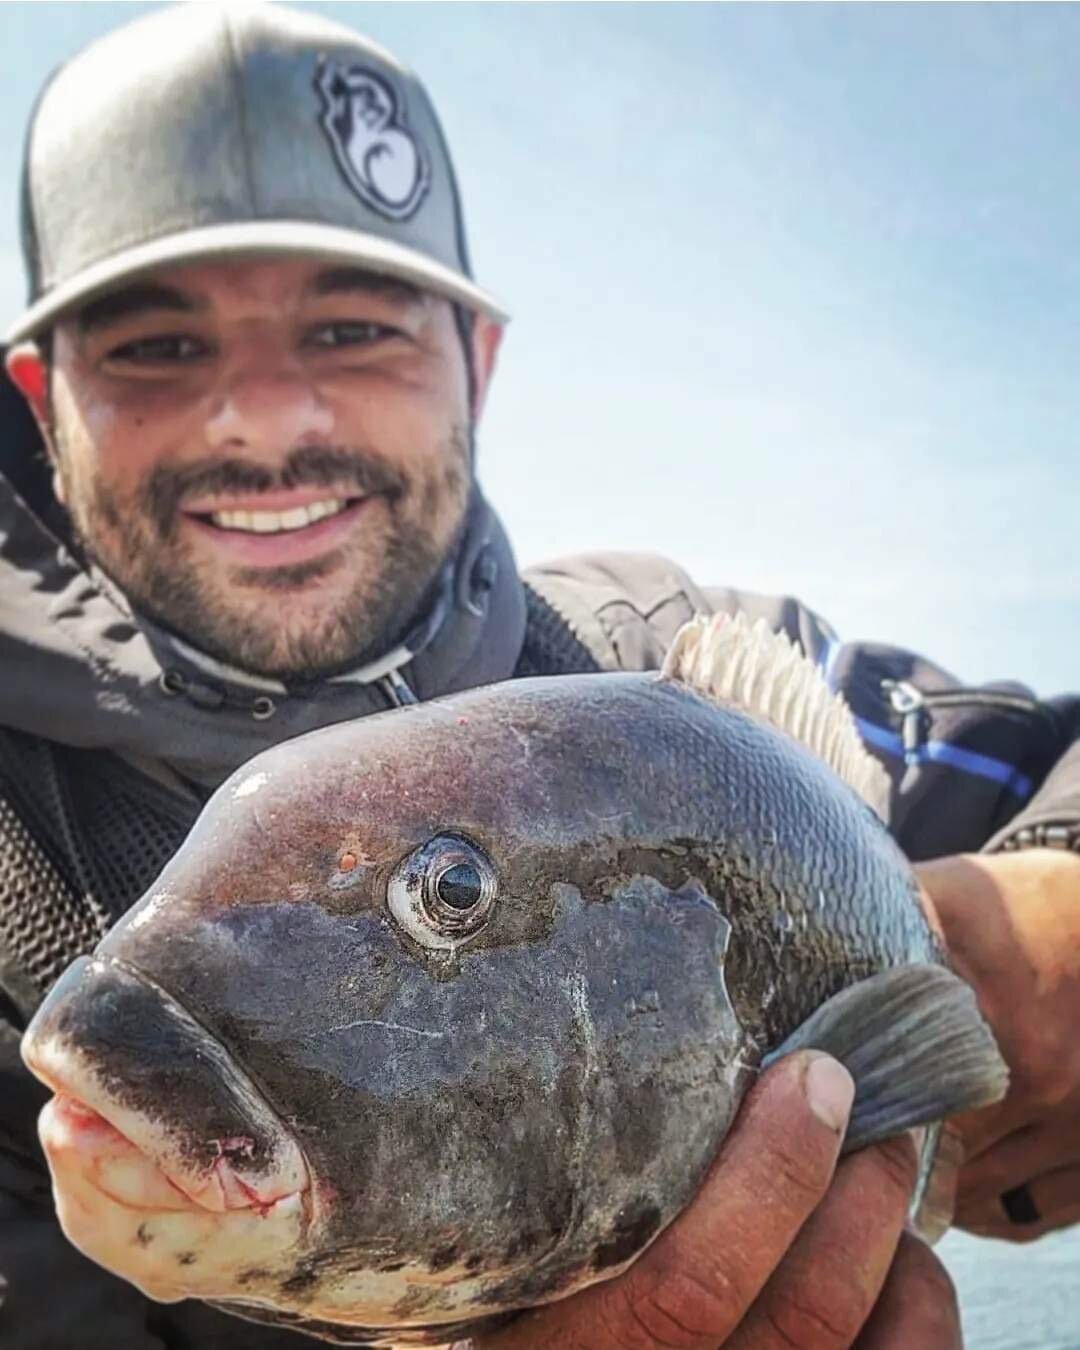 “The tautog bite is good on the Taunton River, like this keeper caught by Brian Andrade,” said Dave Henault of Ocean State Tackle.